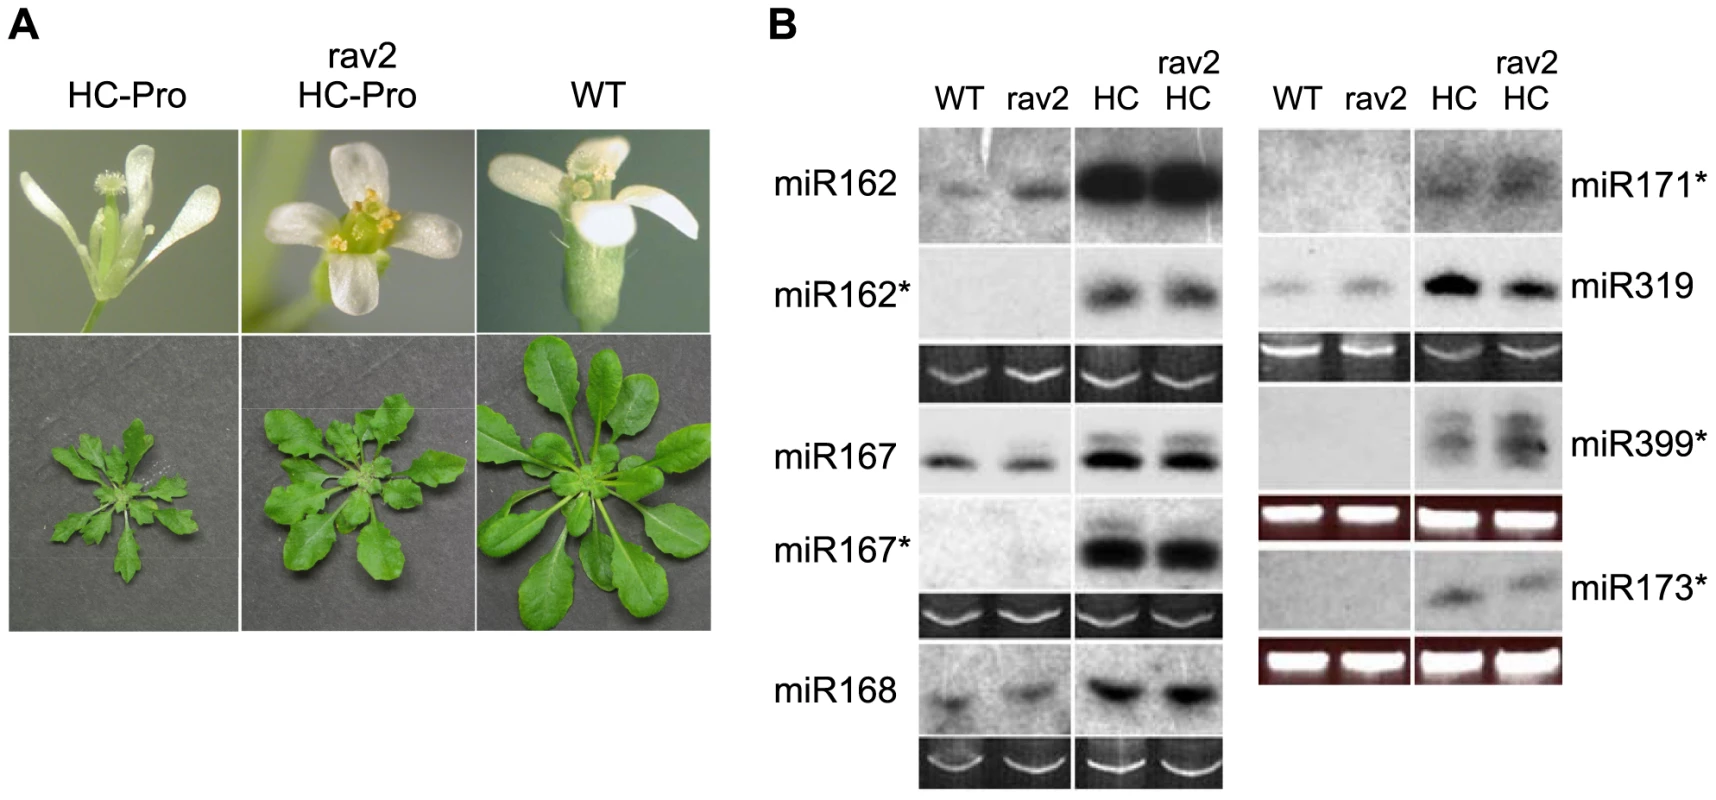 RAV2 is Required for Many HC-Pro-associated Morphological Anomalies but not for Defects in MicroRNA Biogenesis.